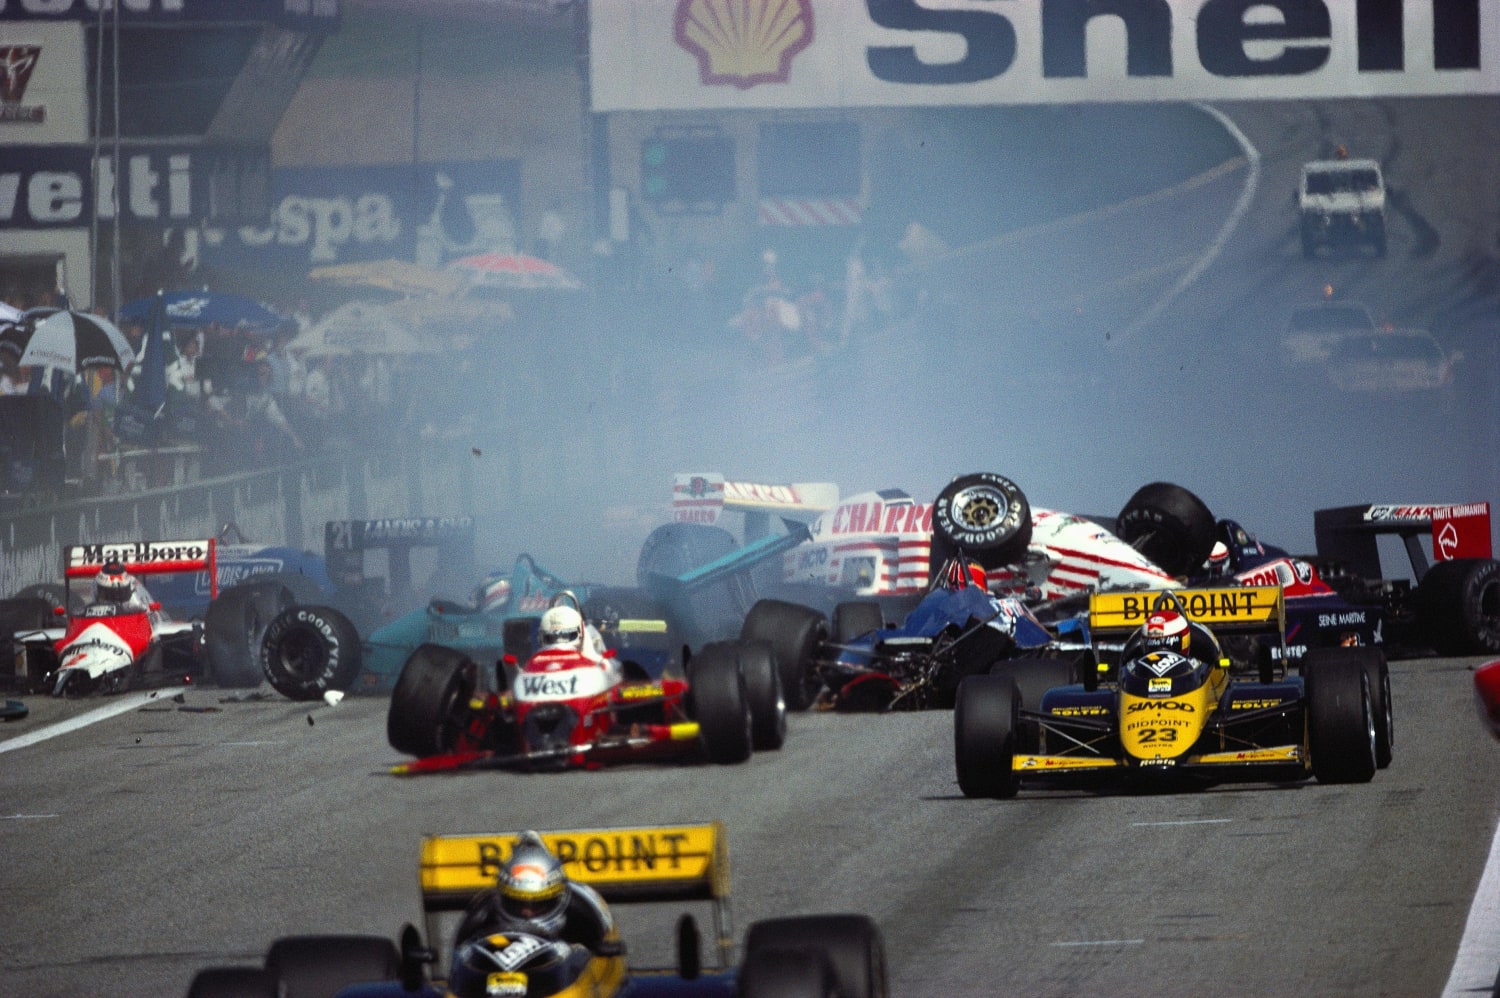 10 best moments from the Austrian Grand Prix